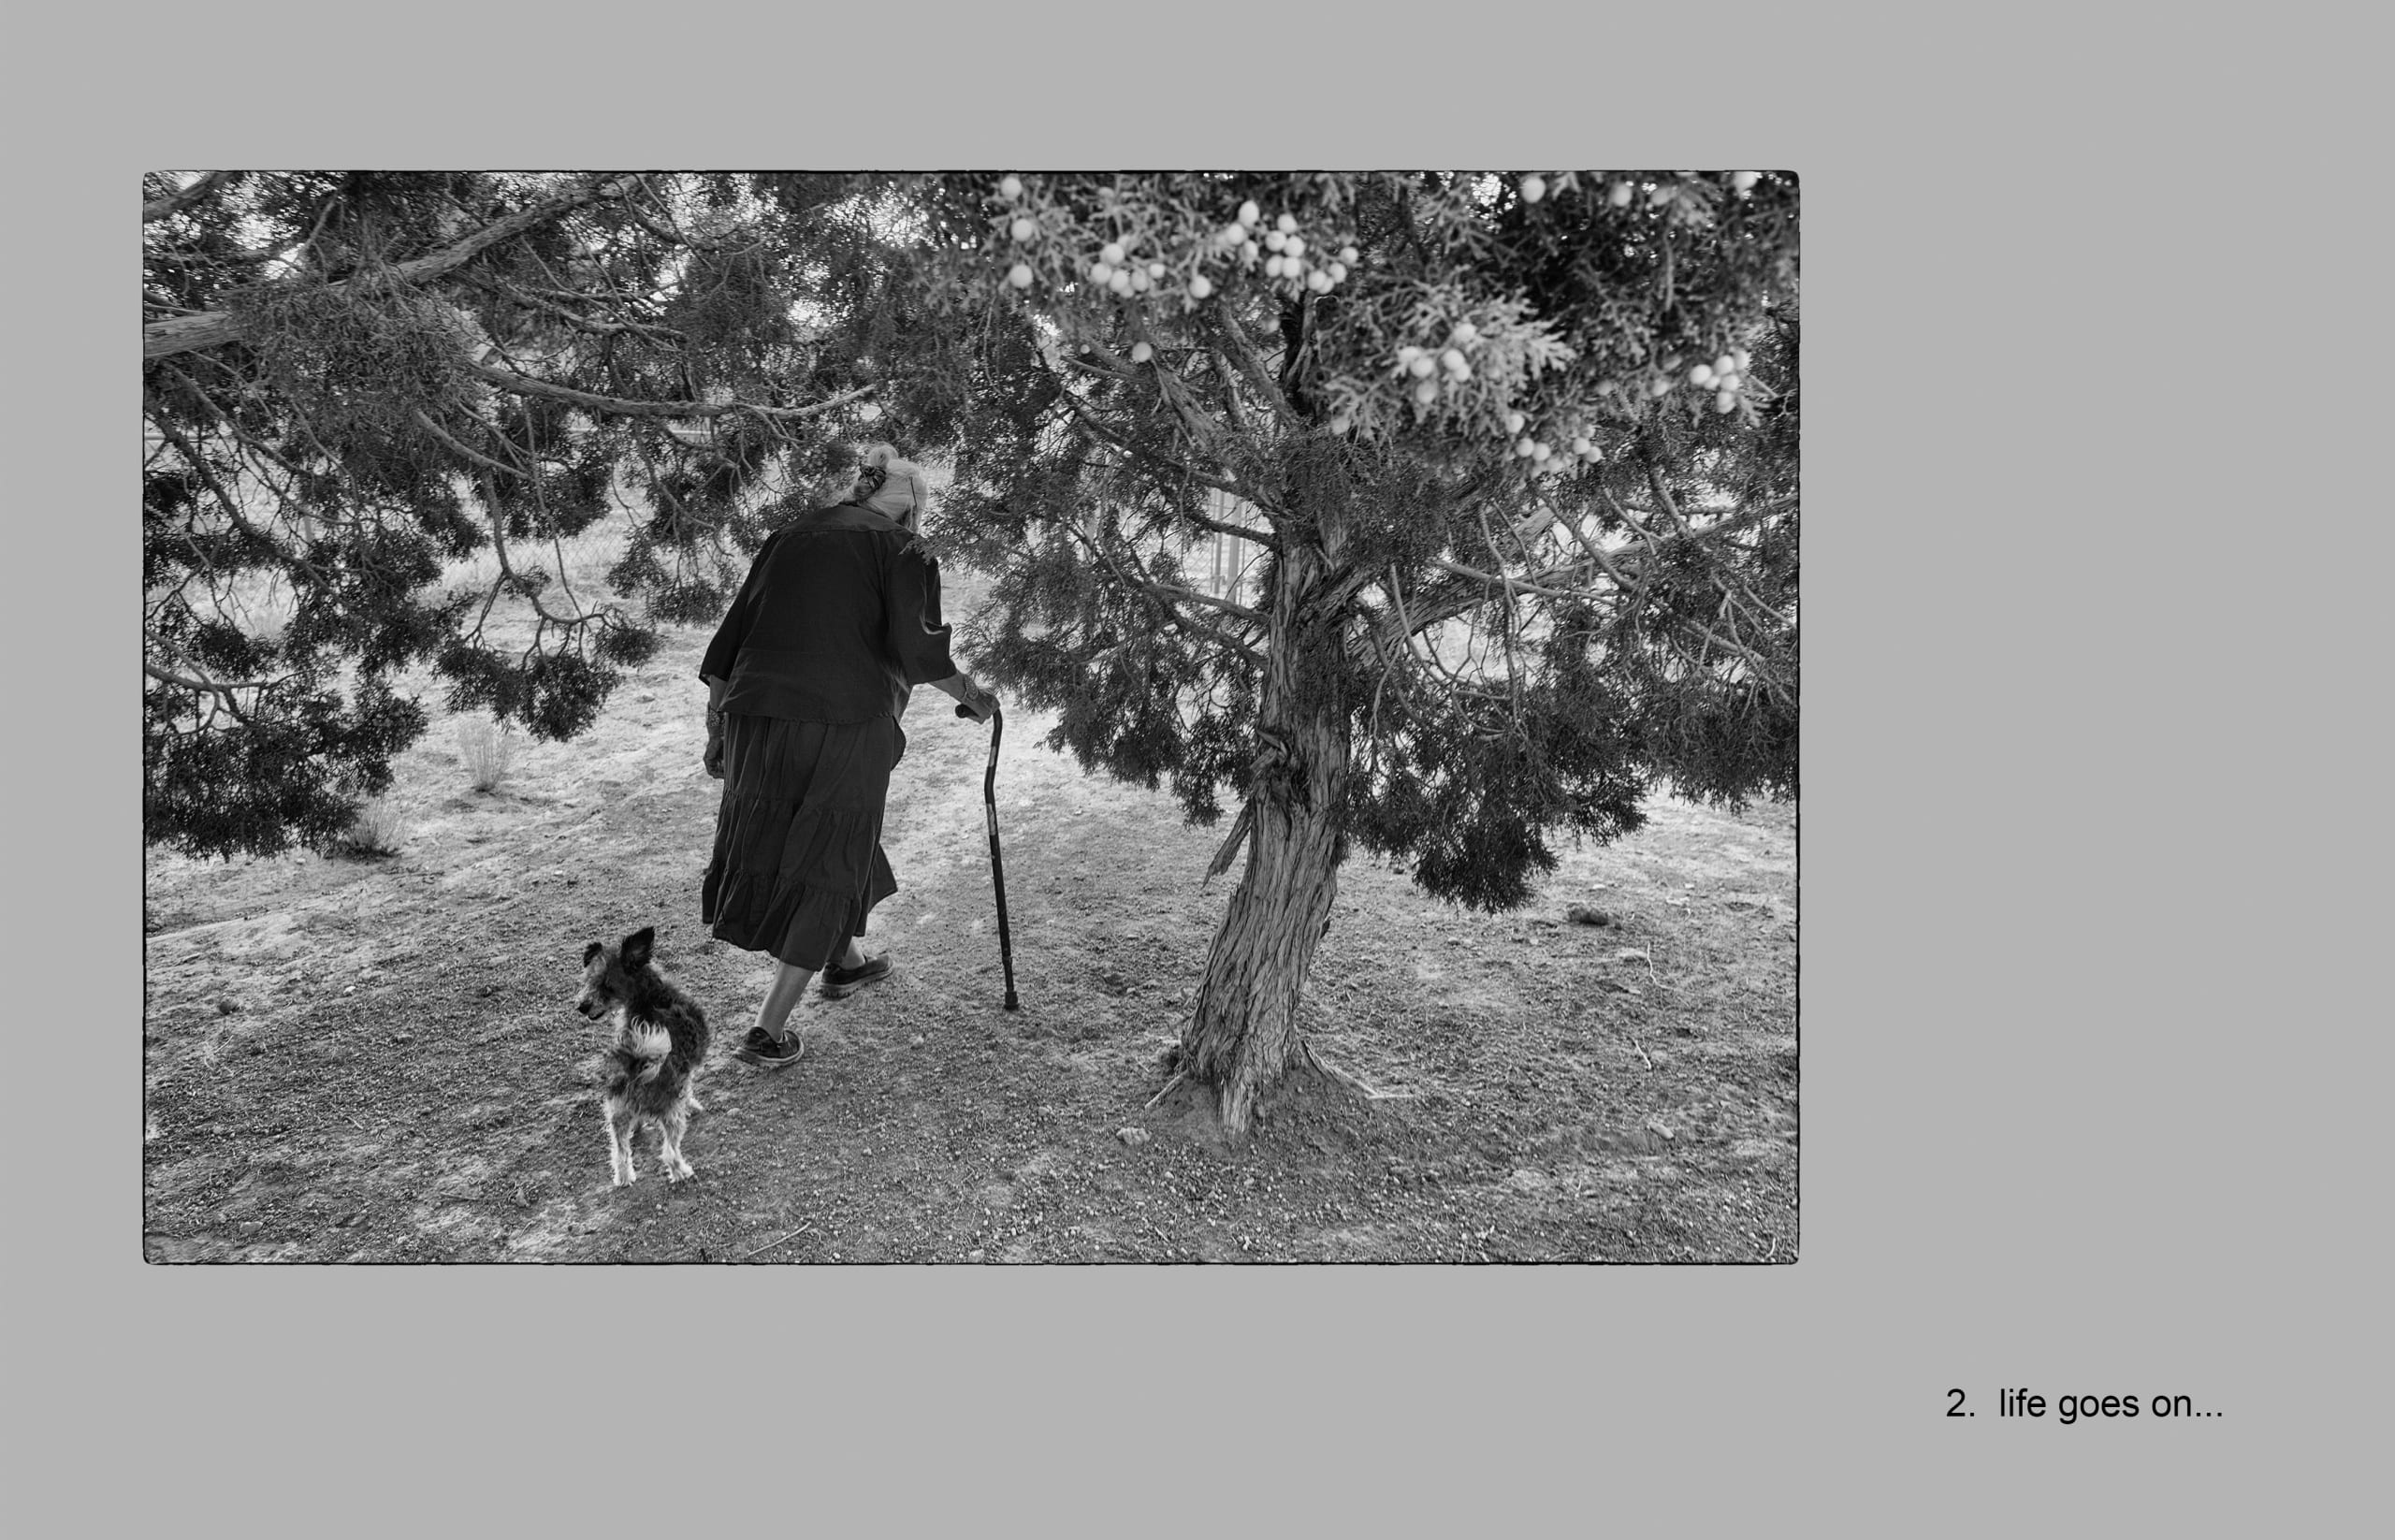 Black-and-white photo showing a matriarch from the Big Mountain region of the Navajo nation; she wears a skirt and walks with the aid of a cane as she moves away from the camera and passes under a tree; she is followed by a small dog who stops to look back for a moment